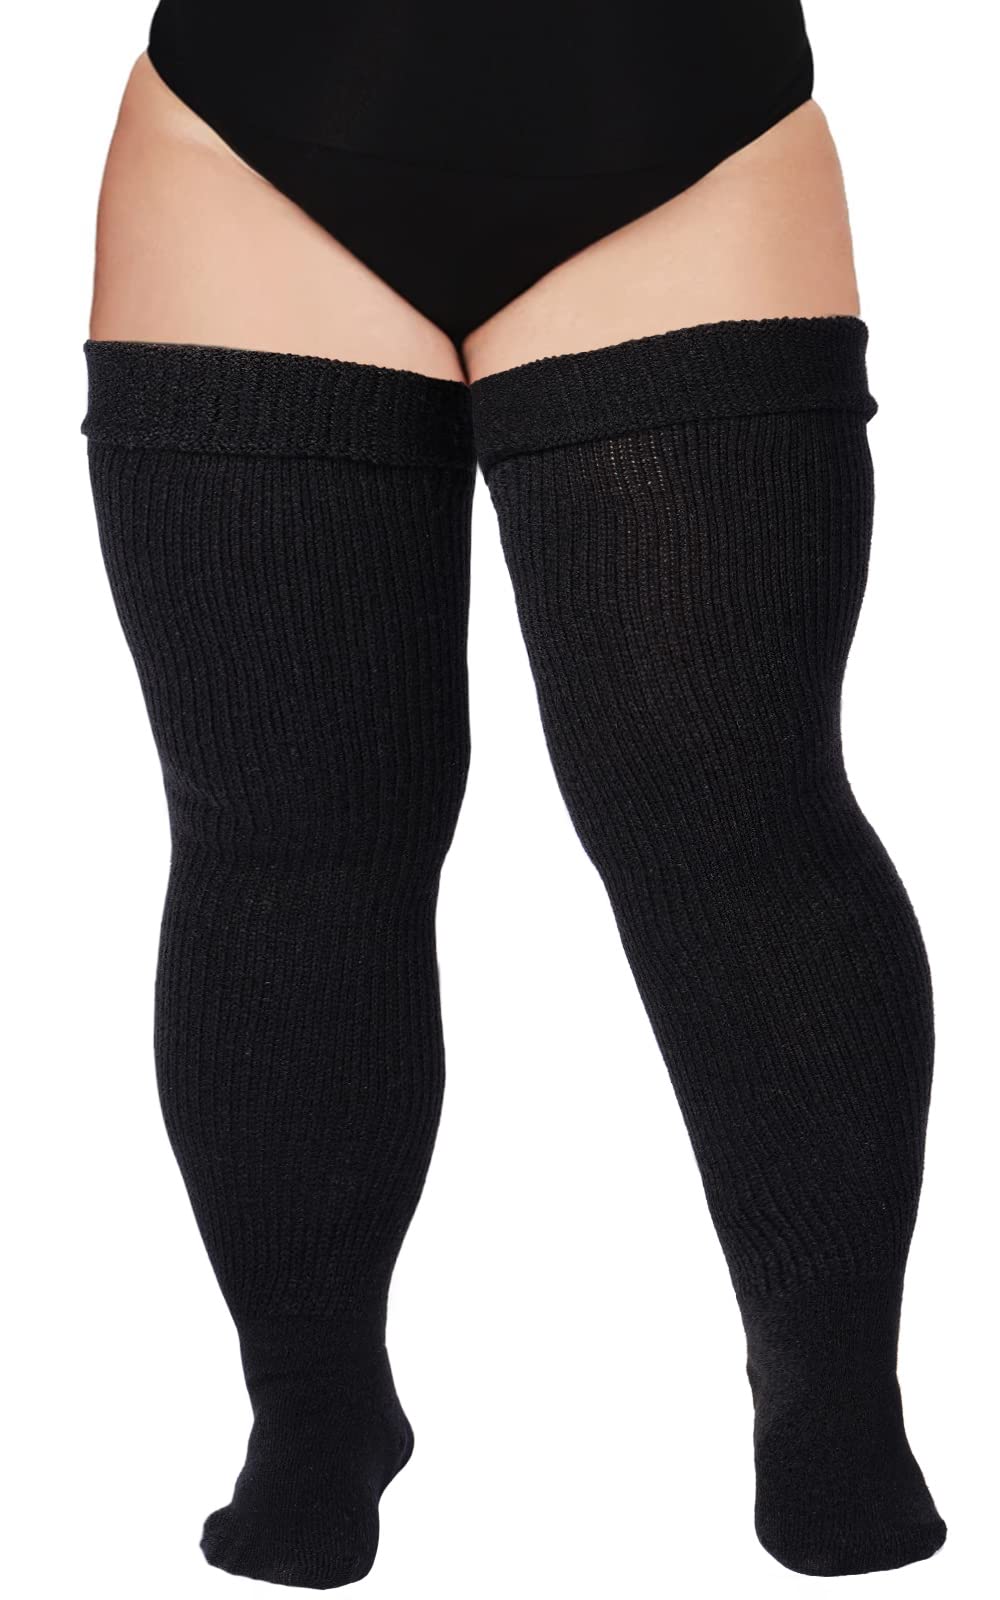 Classic Triple Striped Socks  Thigh High One Size Stockings for